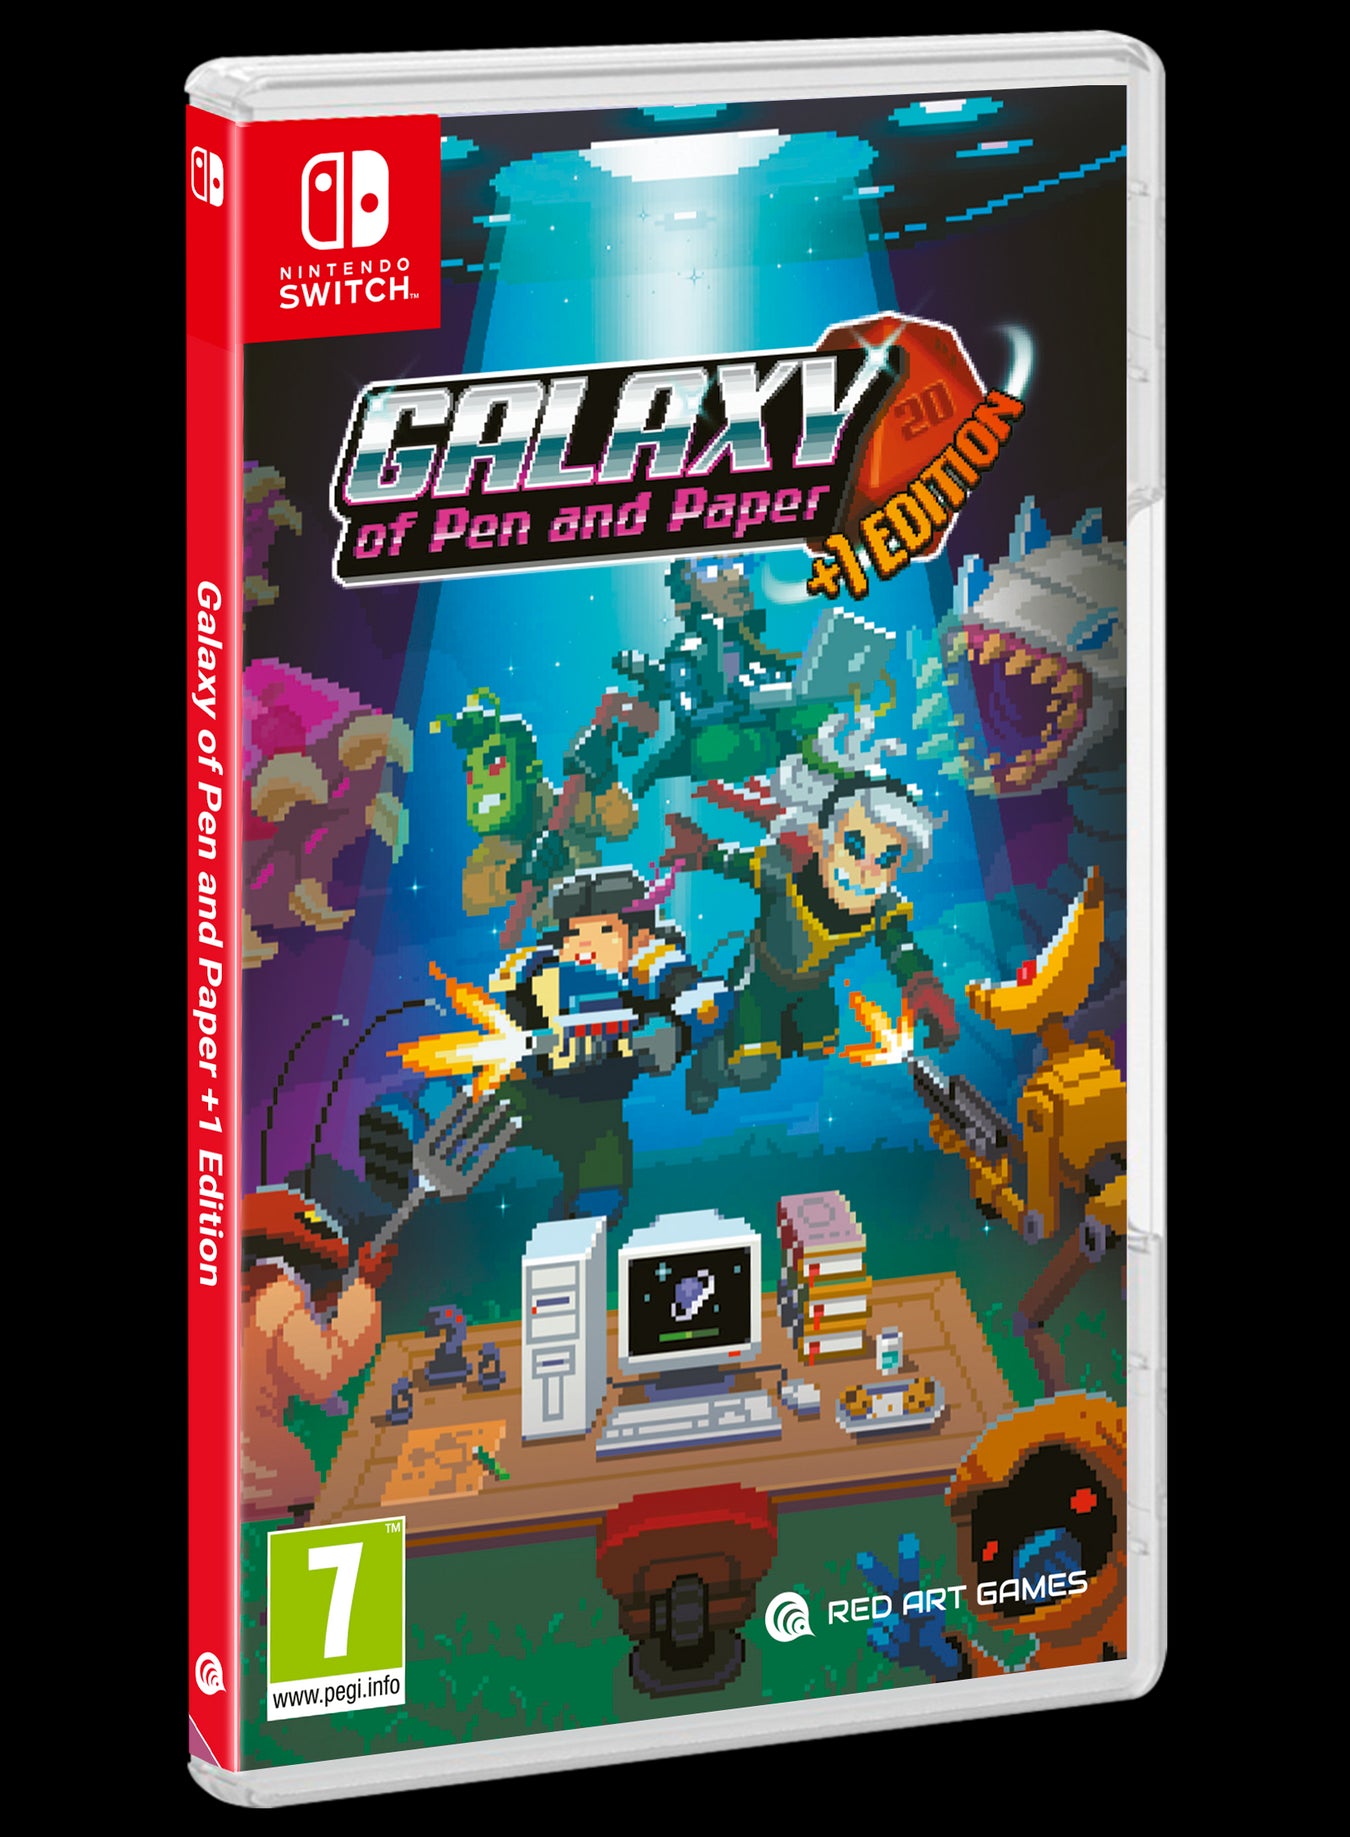 Galaxy of Pen and Paper +1 Edition for Nintendo Switch & PS4